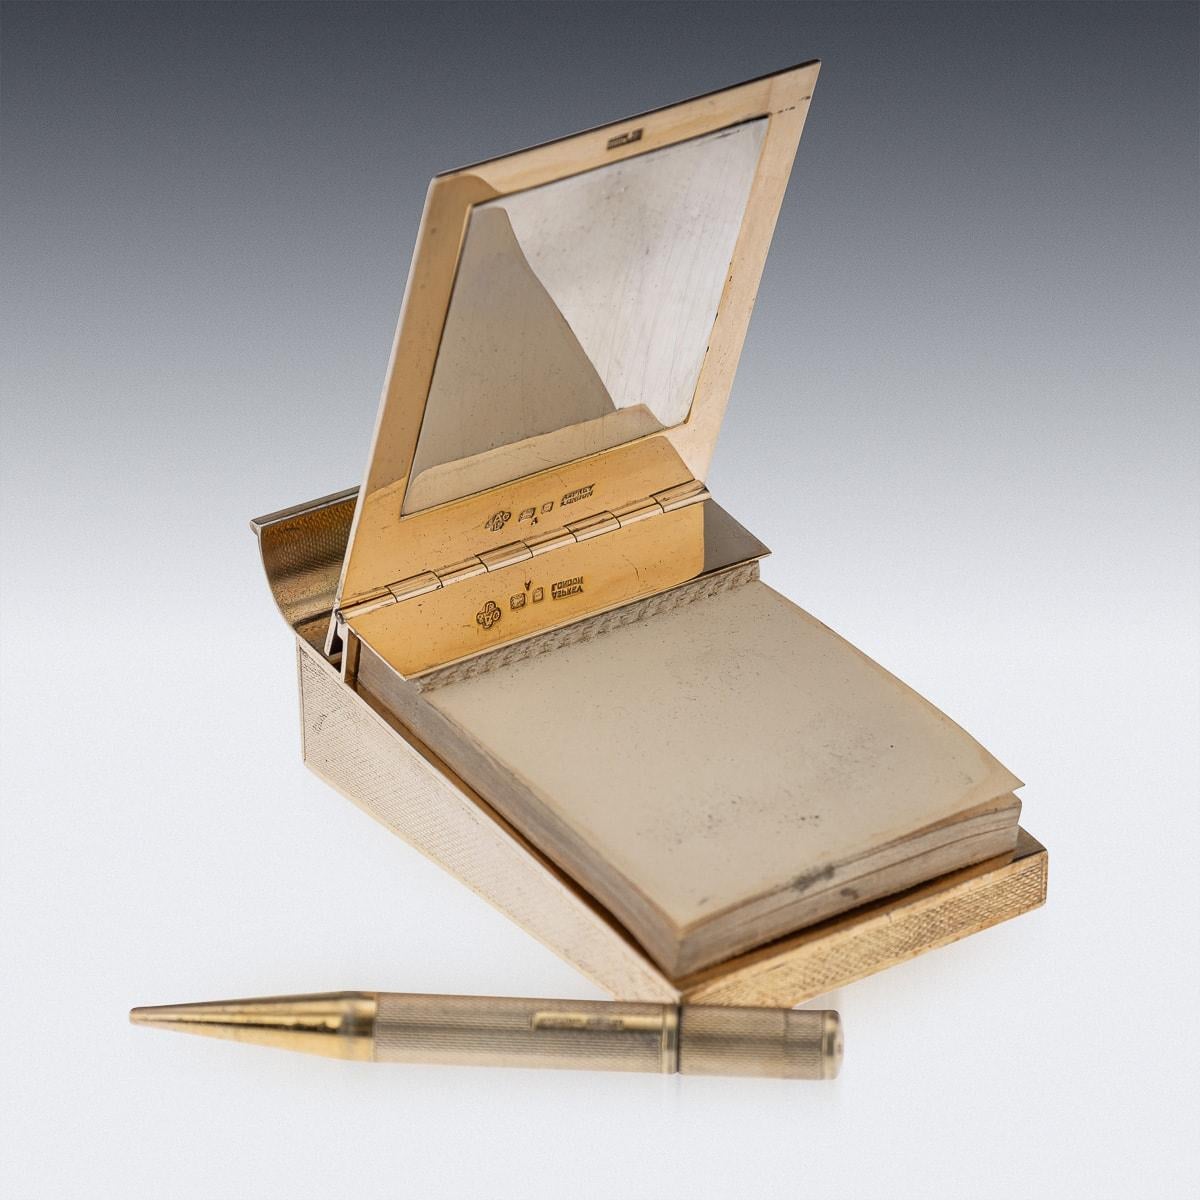 Stunning mid-20th Century English solid silver gilt notepad and pencil. This writing set features an engine turn decoration on the outside and a fitted pencil. Created by the renowned London silversmith Asprey of London, this rare and unique piece